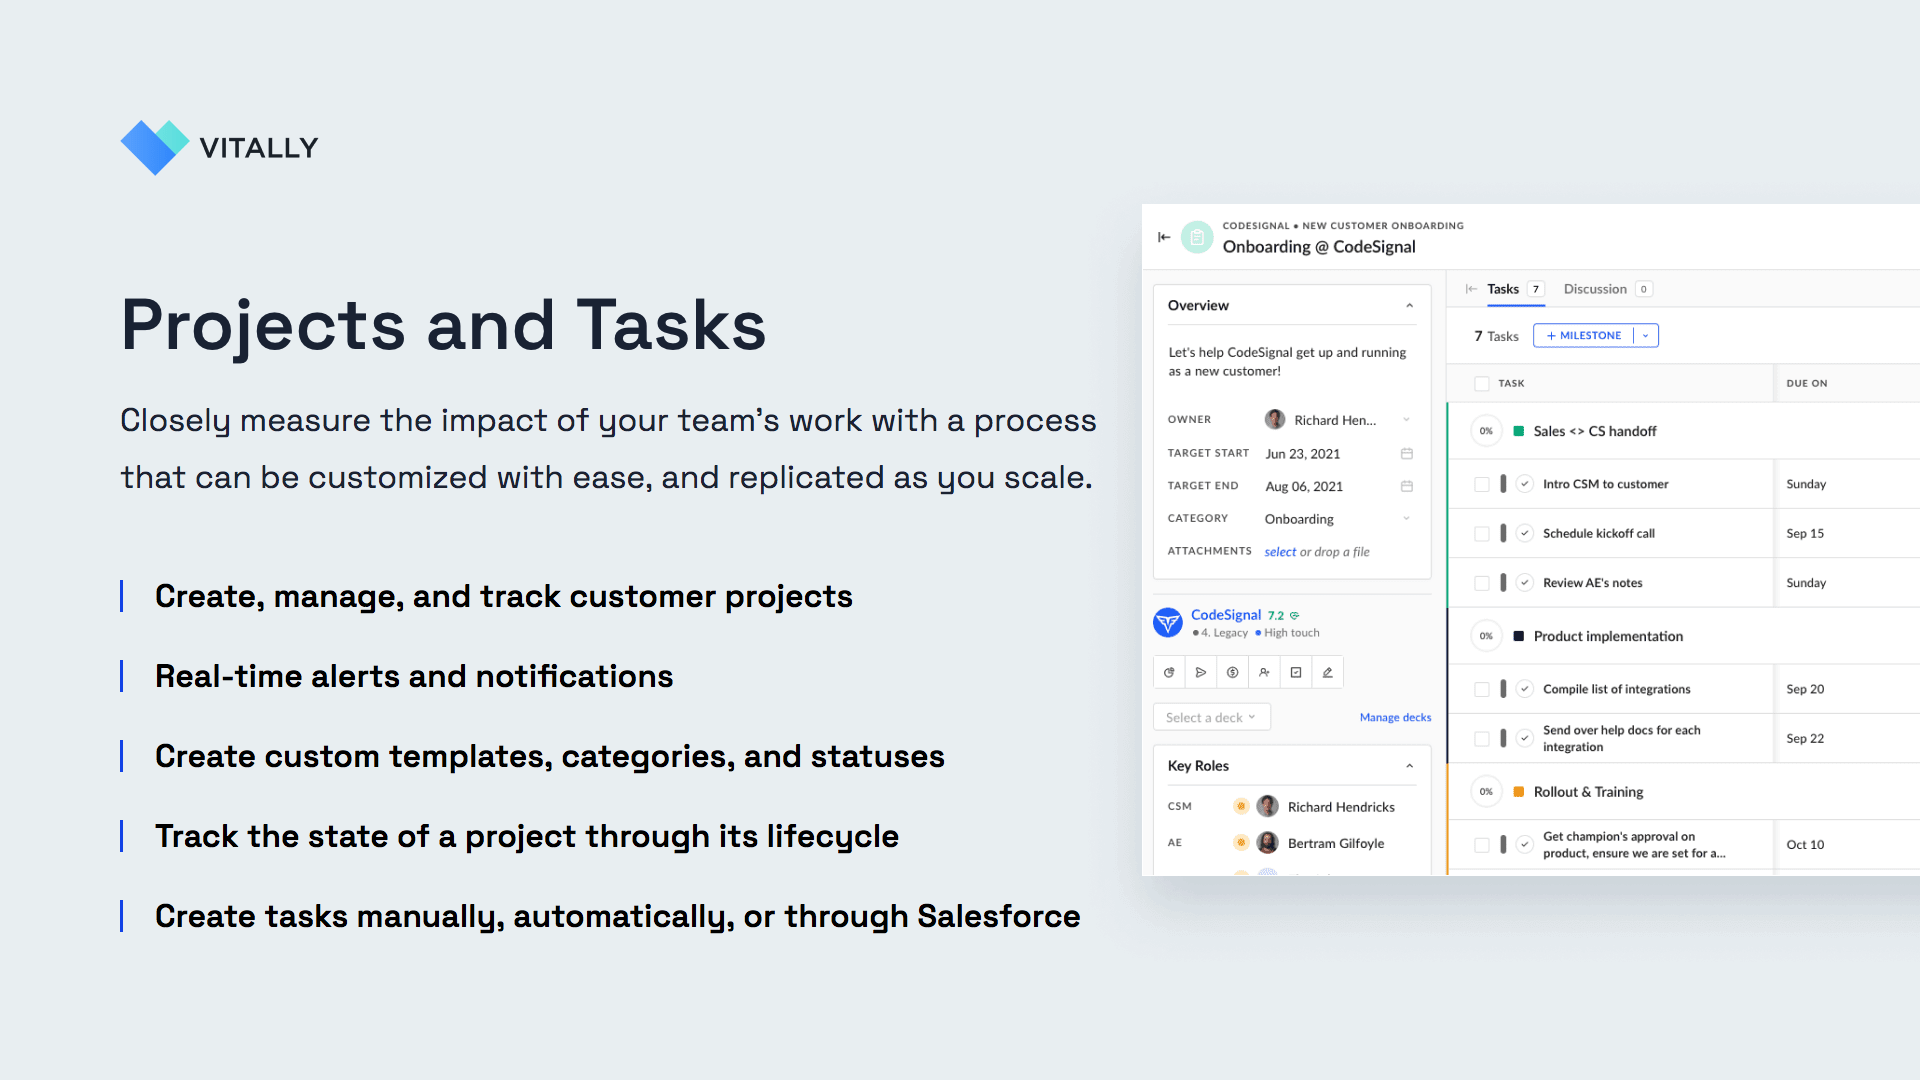 Projects and Tasks -- Closely measure the impact of your team’s work with a process that can be customized with ease, and replicated as you scale. Create, manage, and track customer projects. Real-time alerts and notifications.